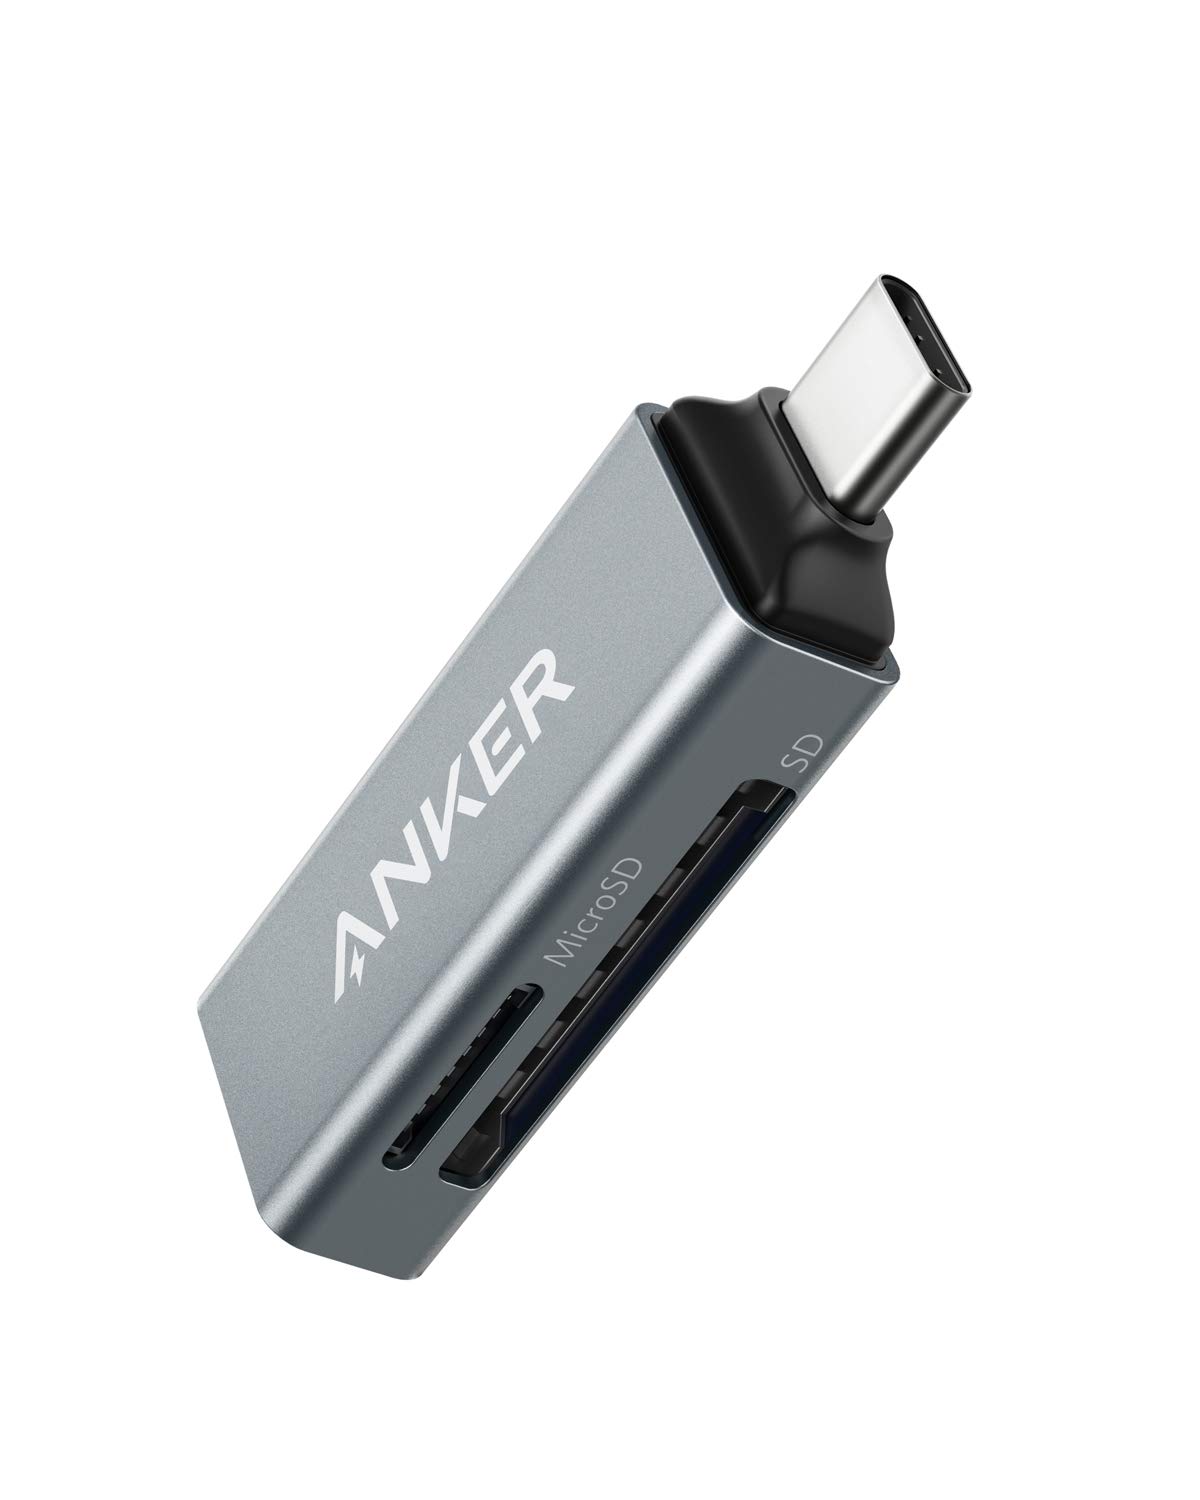 Anker USB-C 2-in-1 カードリーダーSDXC / SDHC / SD / MMC / RS-MMC / microSDXC / microSDHC / microSD / UHS-Iカード対応